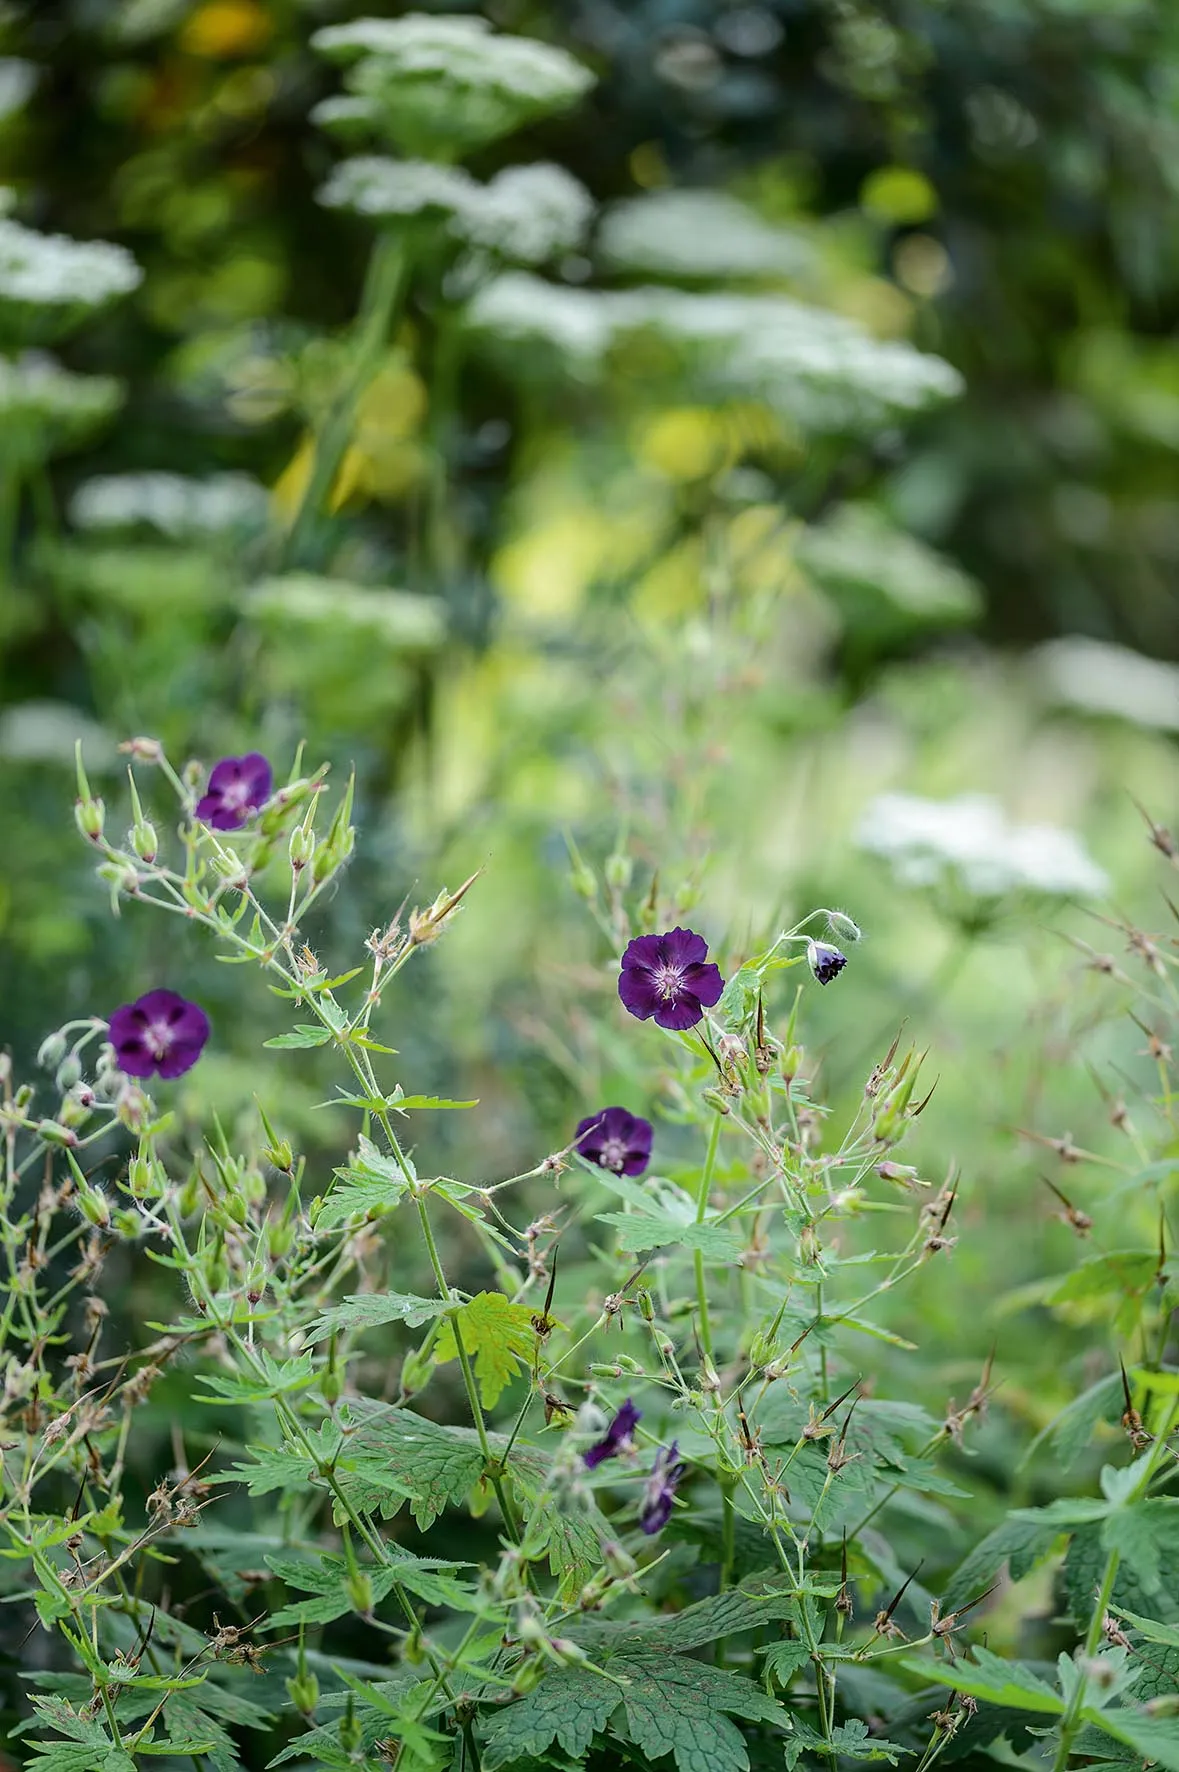 Geranium phaeum ‘Raven’. Covered in inky, deep-purple flowers in May and June, this hardy geranium prefers a well-drained spot and will happily tolerate a fair degree of shade. The fresh, green foliage forms useful groundcover. 75cm. RHS H7.